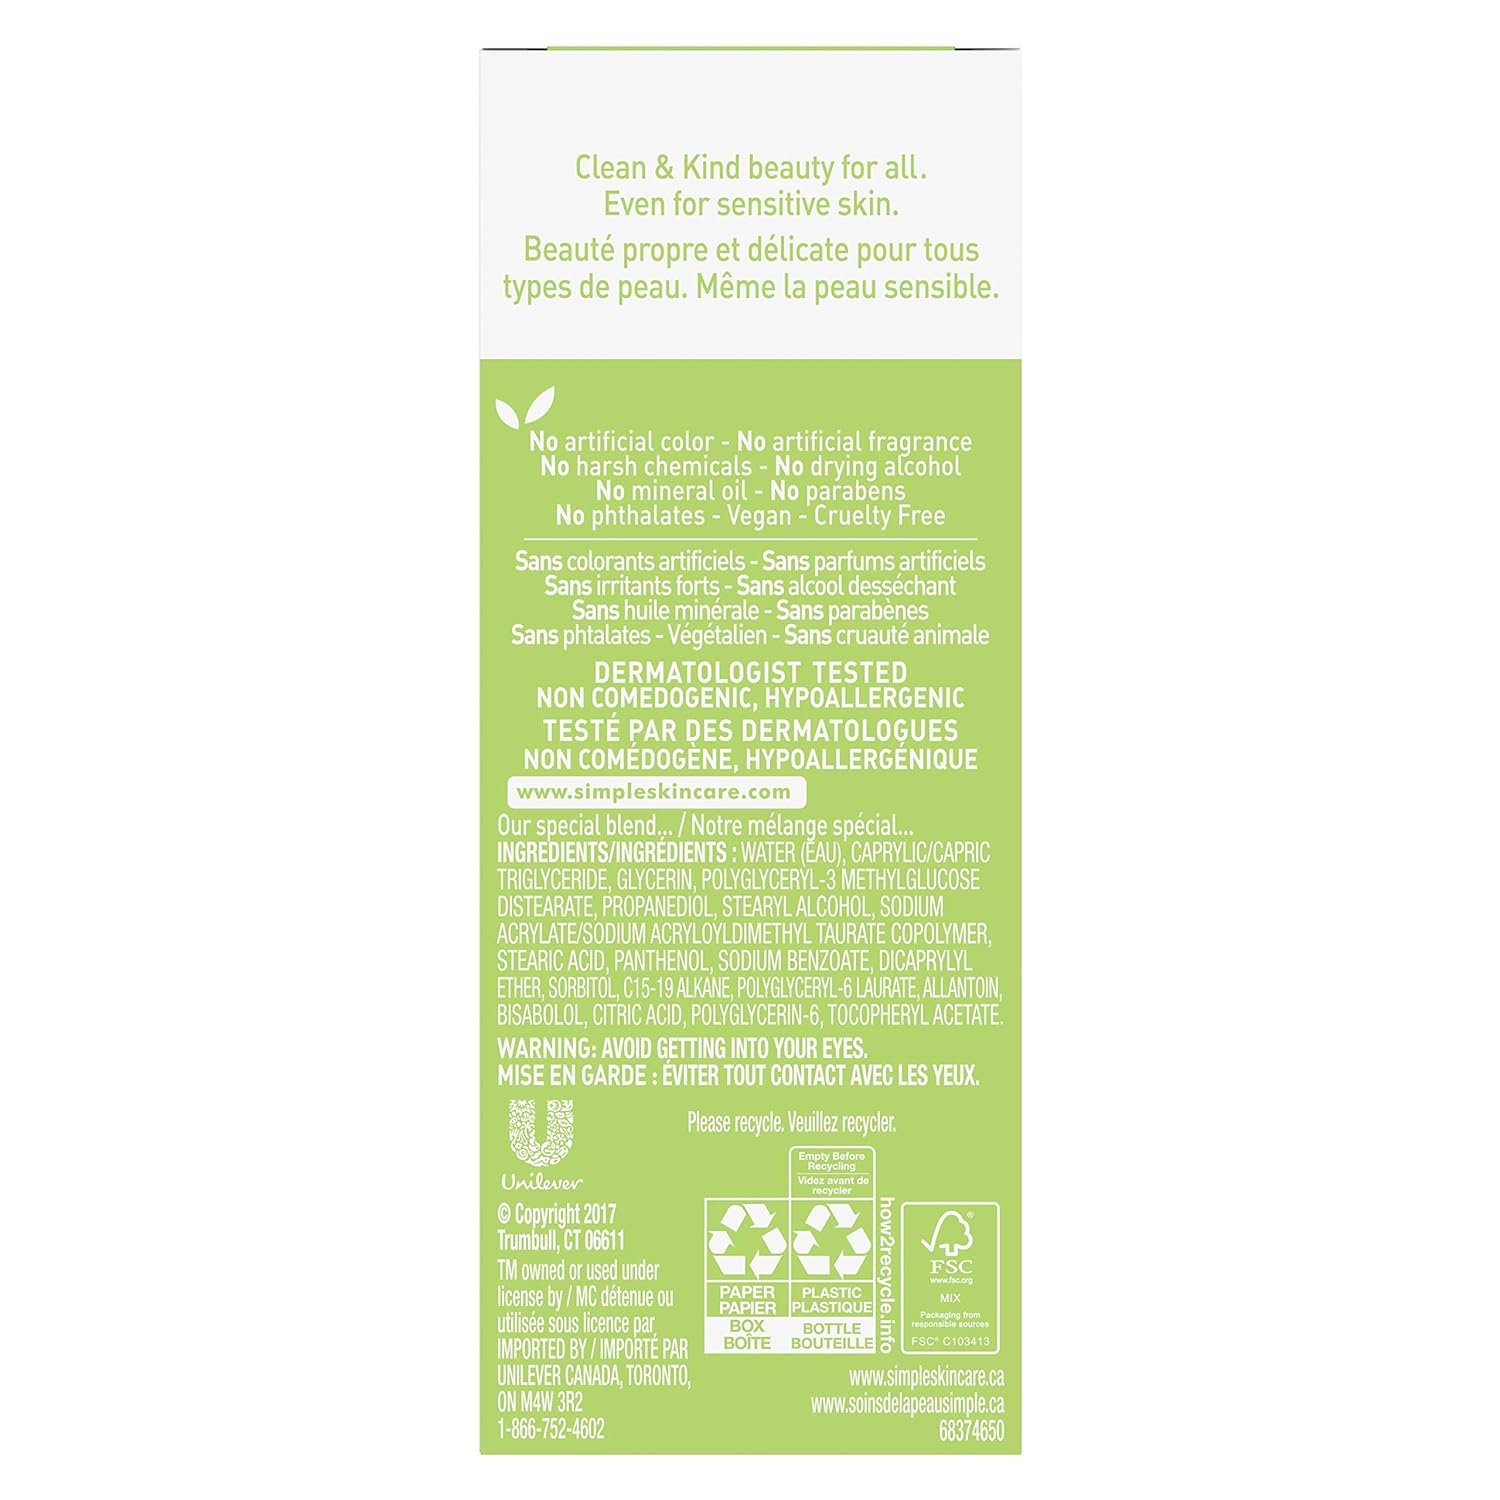 Simple Kind to Skin Face Moisturizer Replenishing Rich 12-Hour Moisturization for All Skin Types, 4.2 fl oz - image 4 of 12